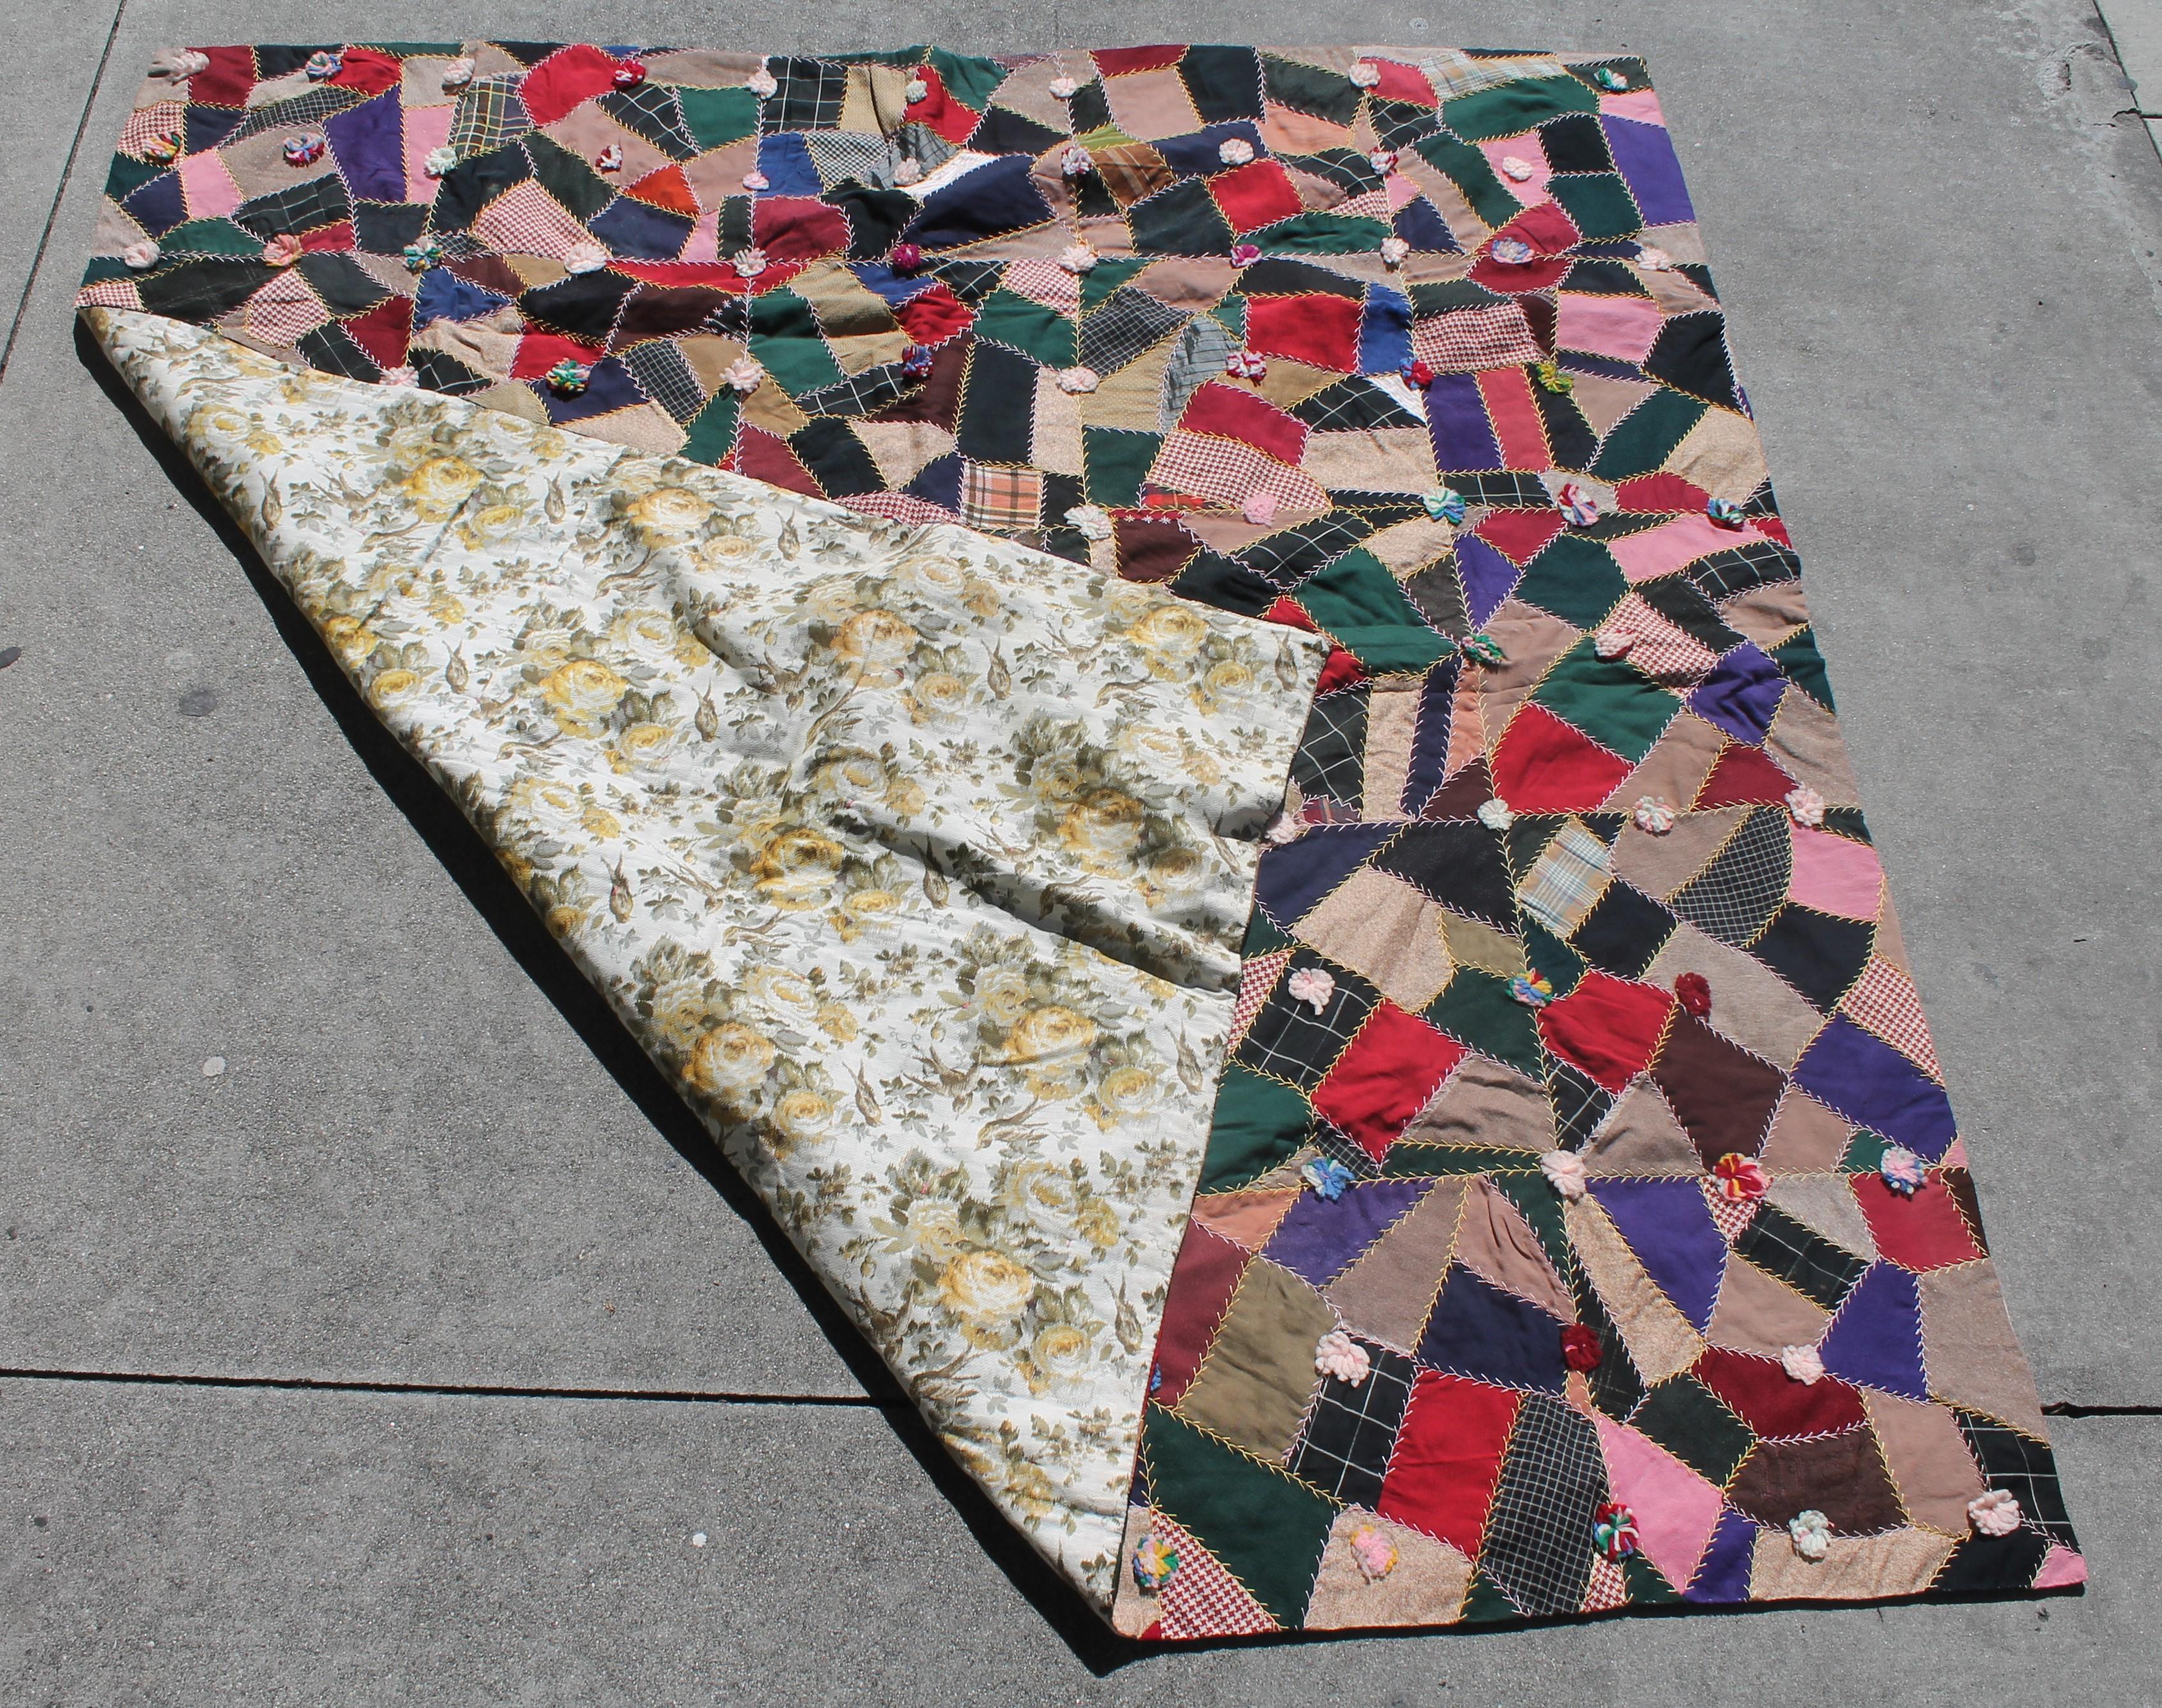 Antique Quilt, 19th Century Wool Crazy Quilt from Pennsylvania In Fair Condition For Sale In Los Angeles, CA